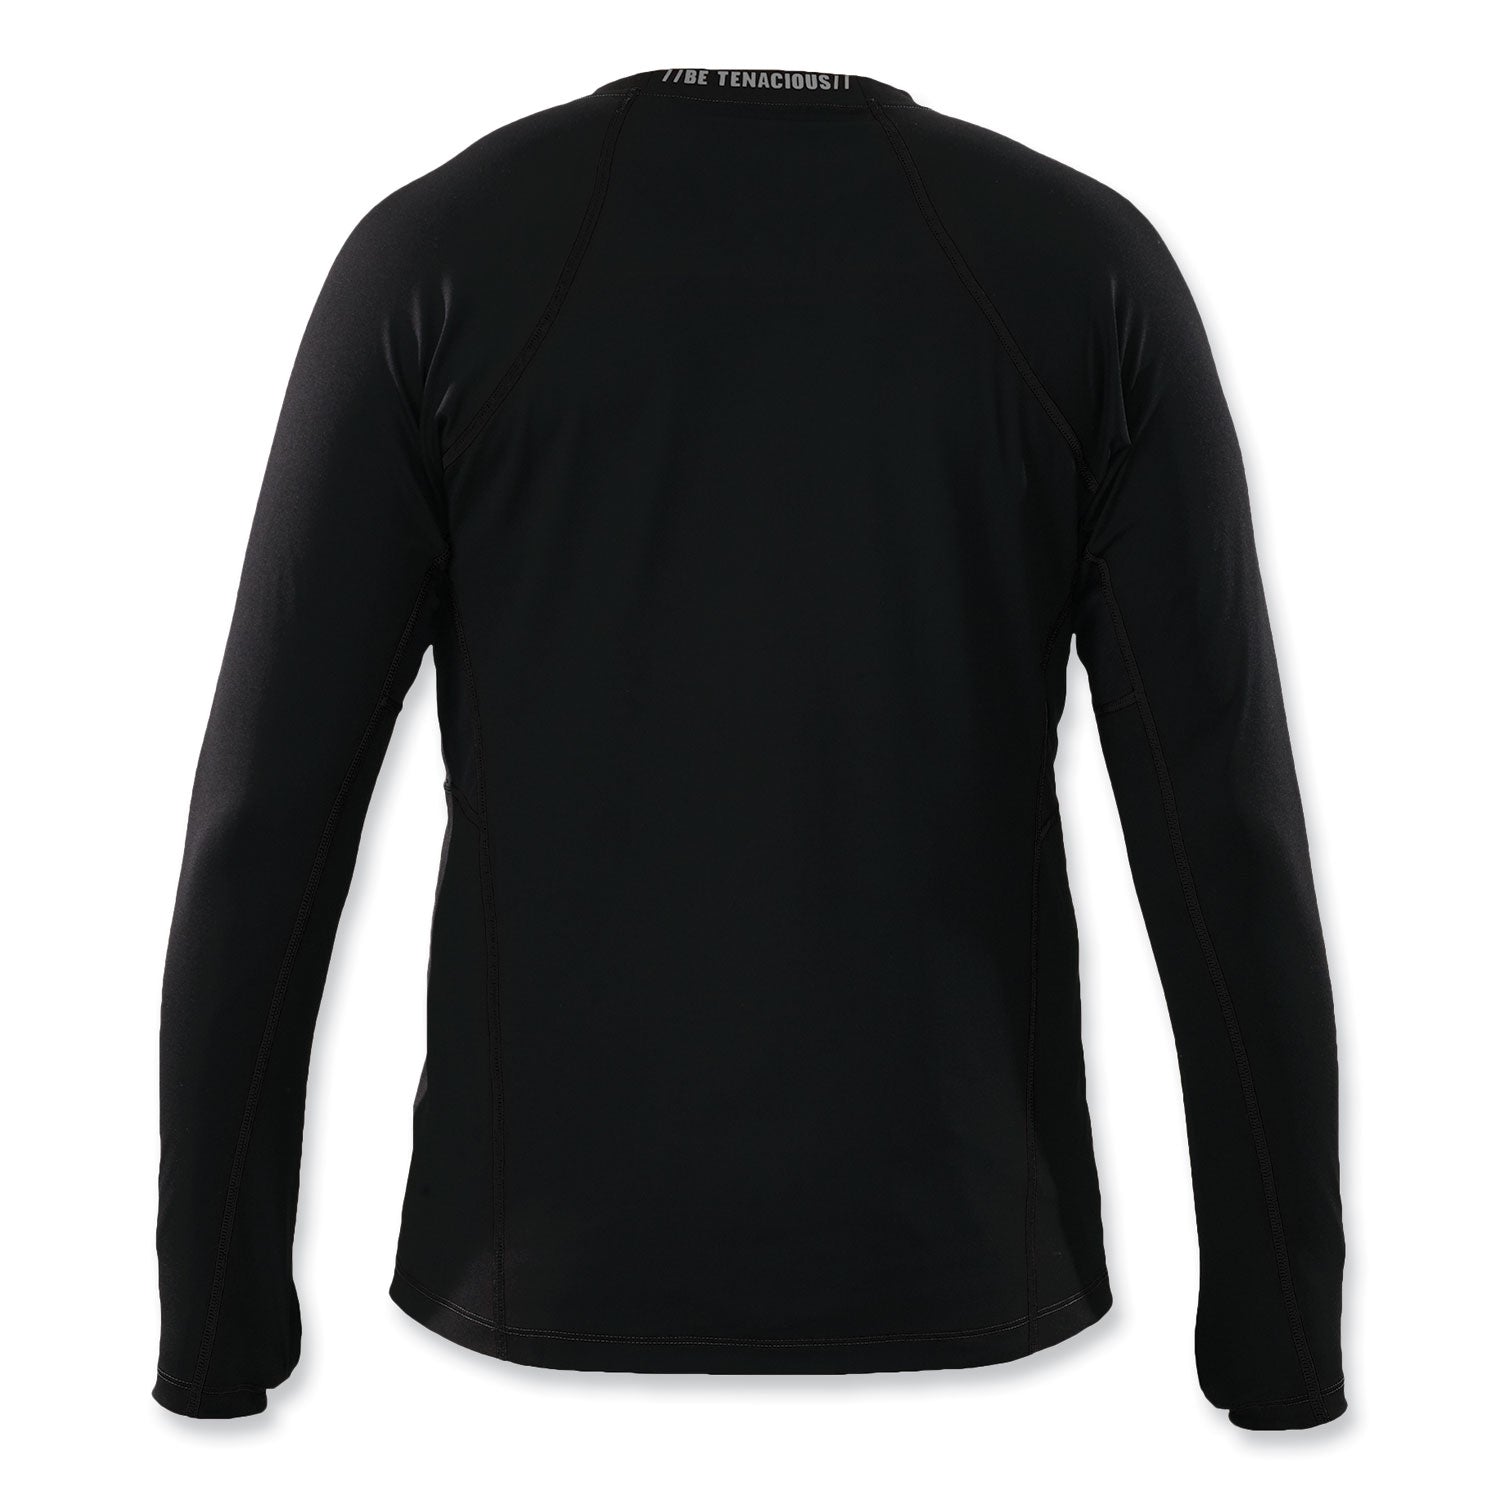 n-ferno-6435-midweight-long-sleeve-base-layer-shirt-x-large-black-ships-in-1-3-business-days_ego40205 - 2